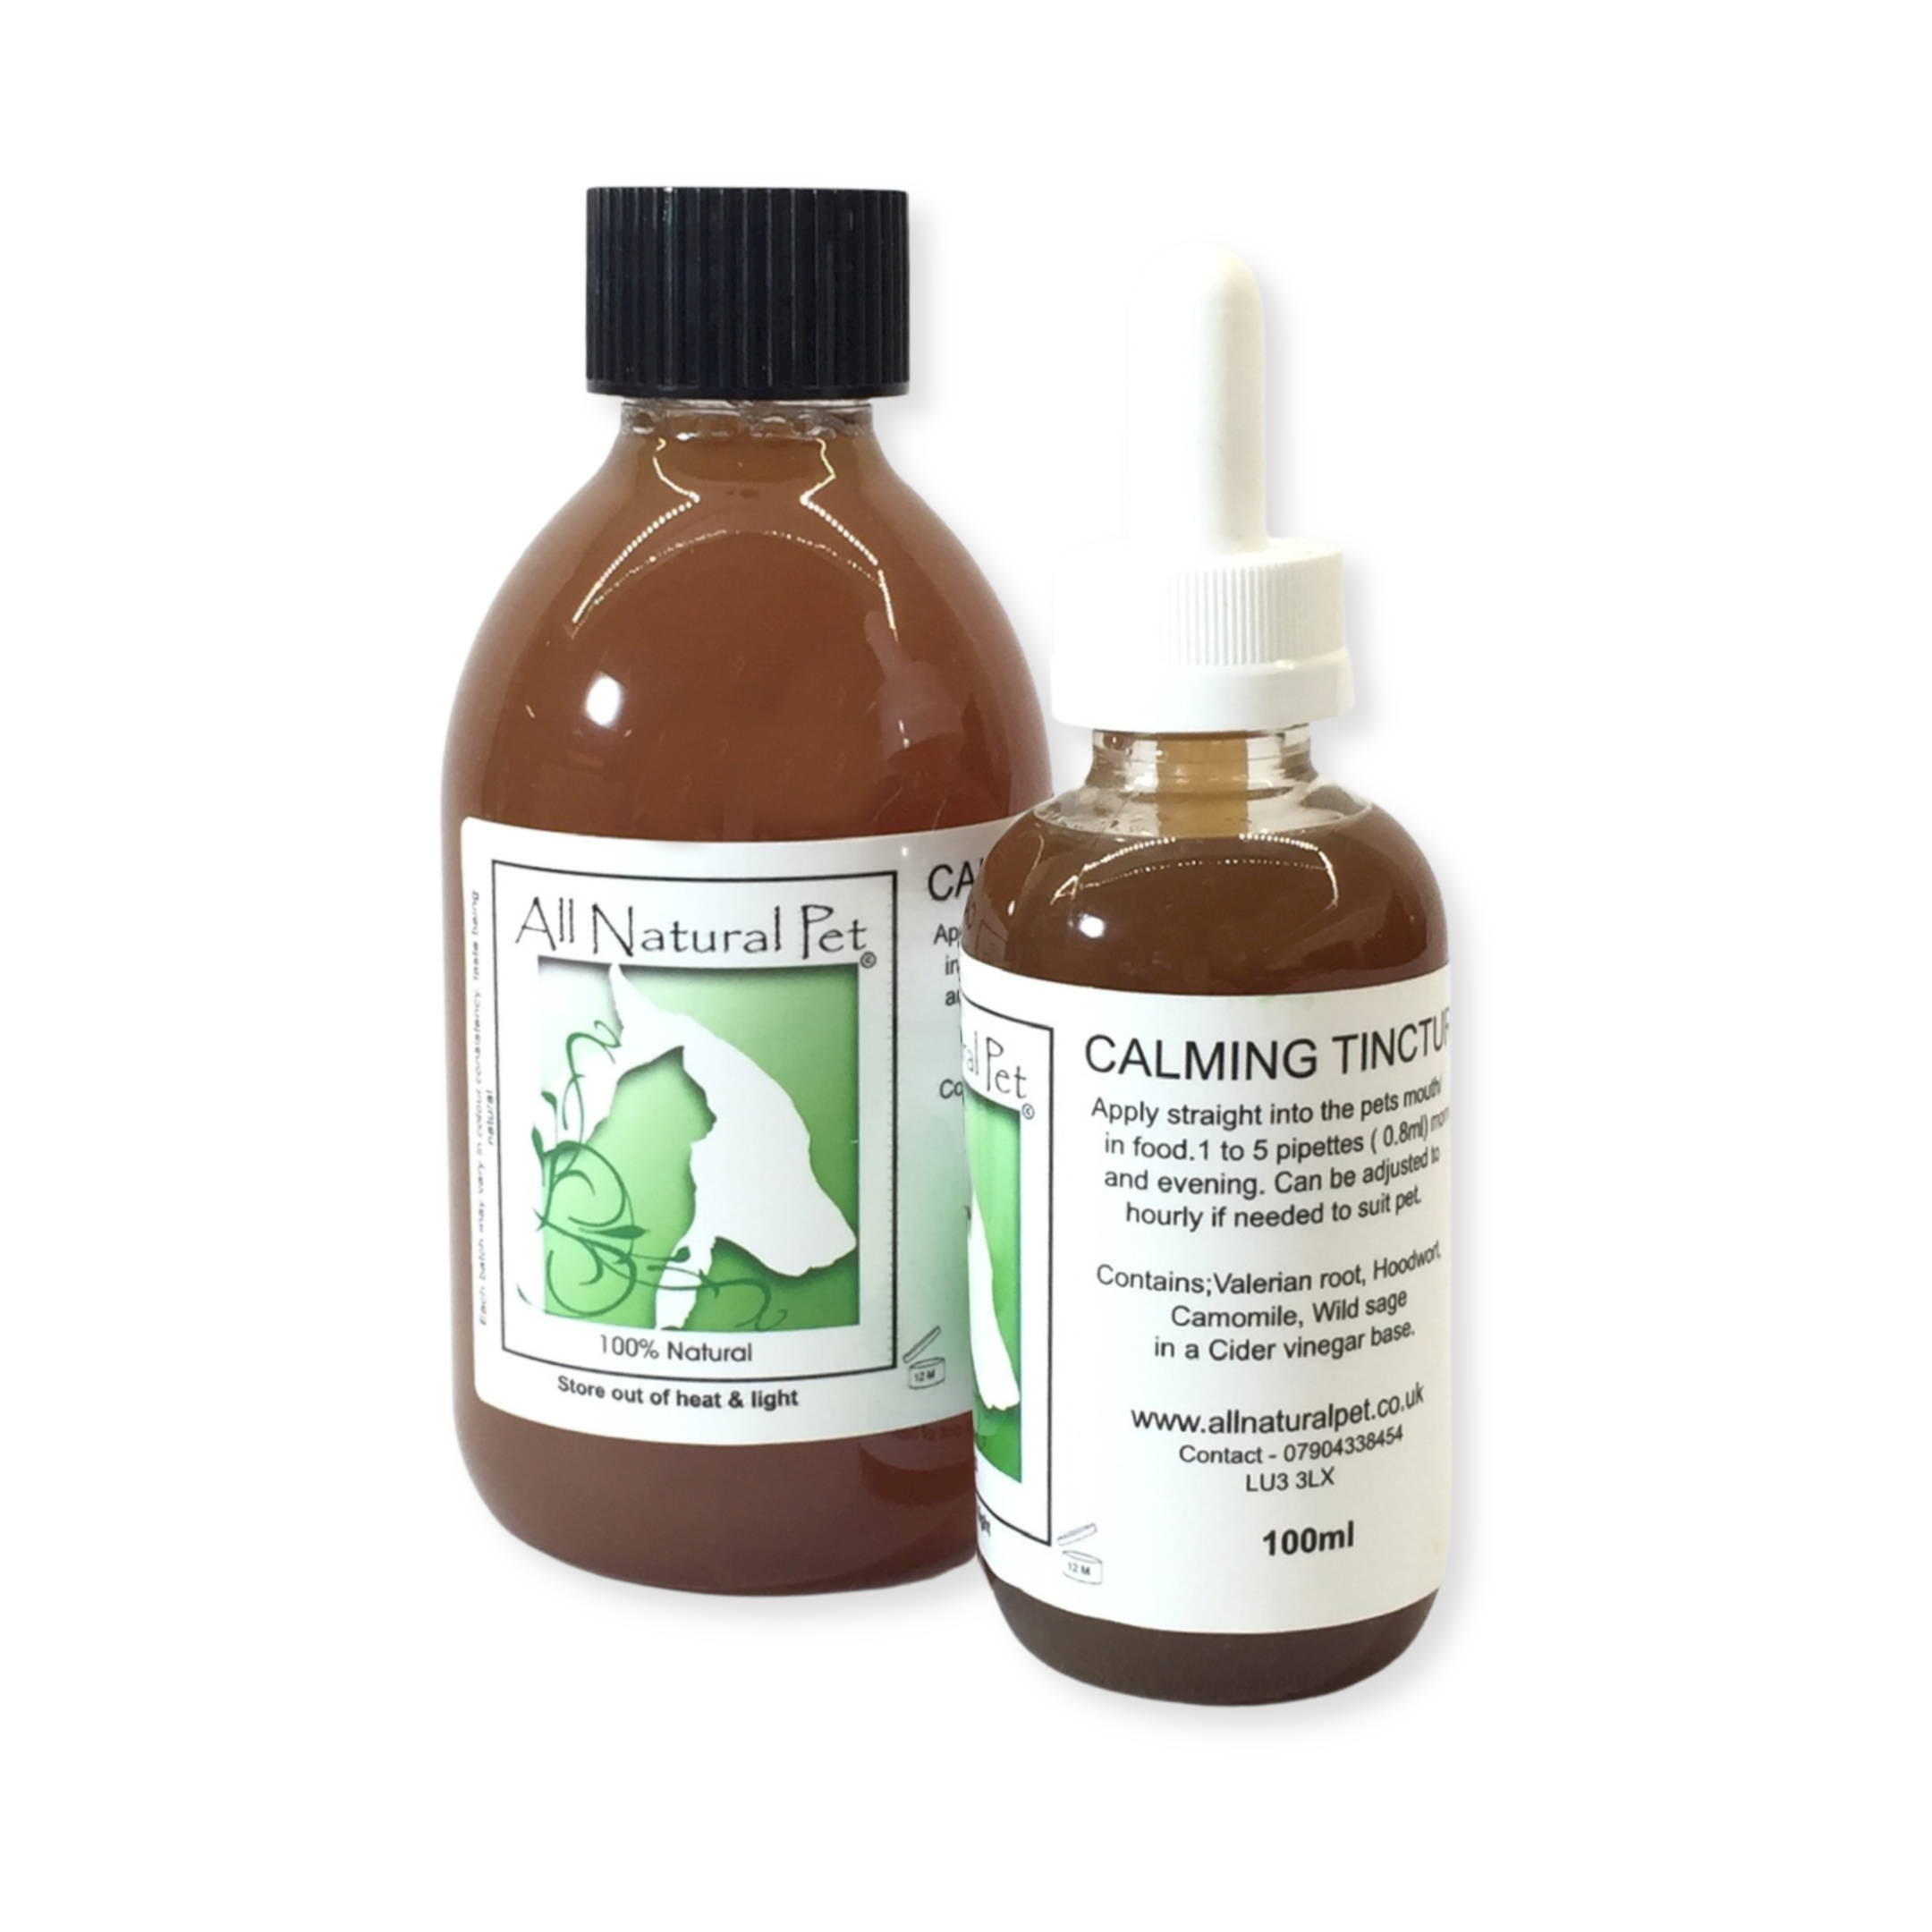 A bottle with a solution made of herbal ingredients  containing Valerian, Hoodwort and chamomile to relax pets and people